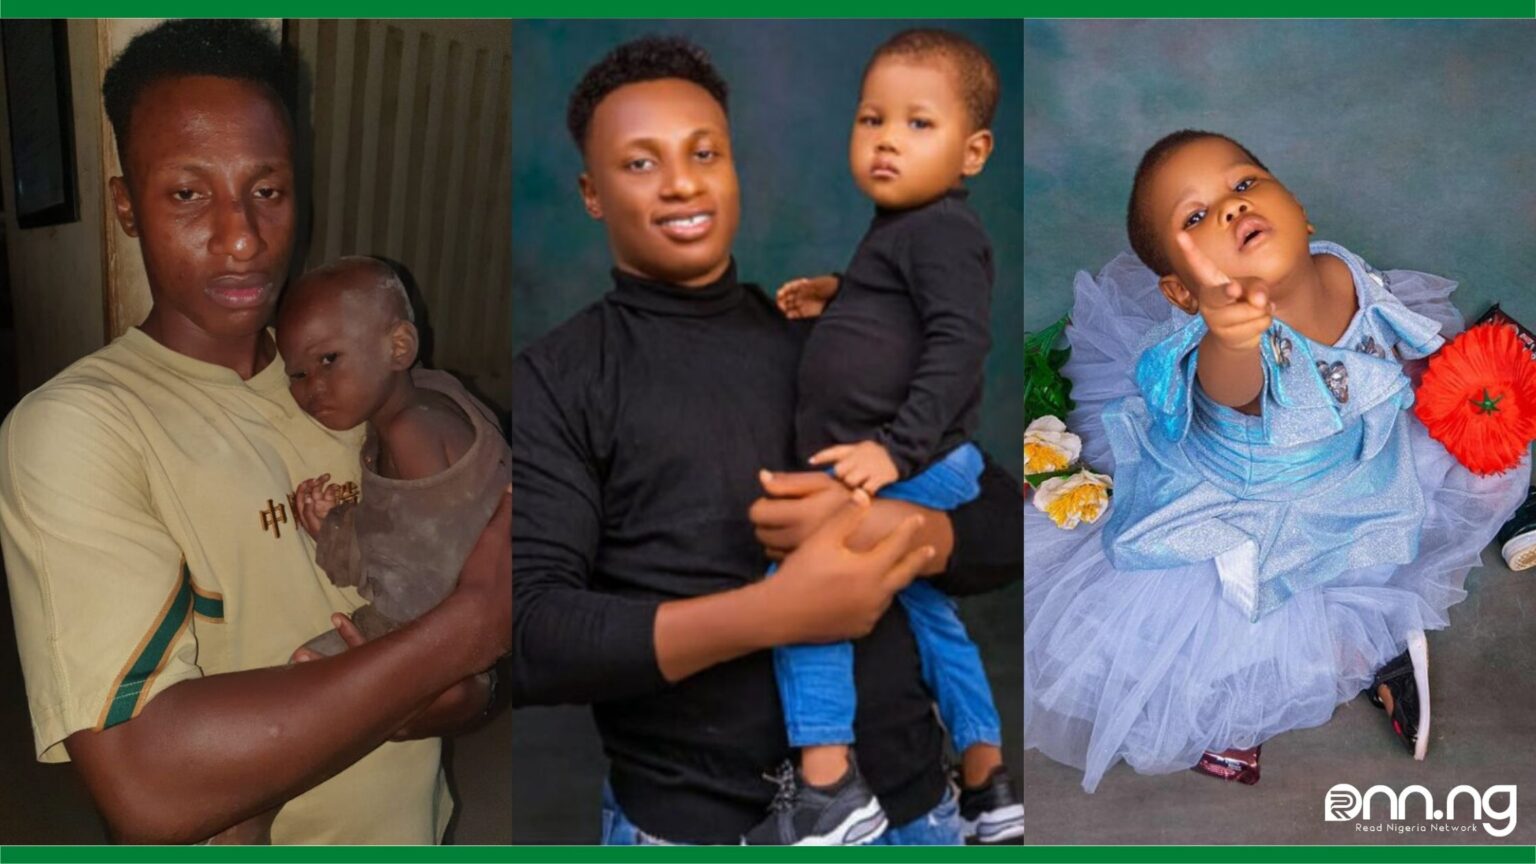 Grass to Grace: Man Who Saved A 2-Year-Old Abadoned Girl Shares Her Recent Heartwarming Pictures